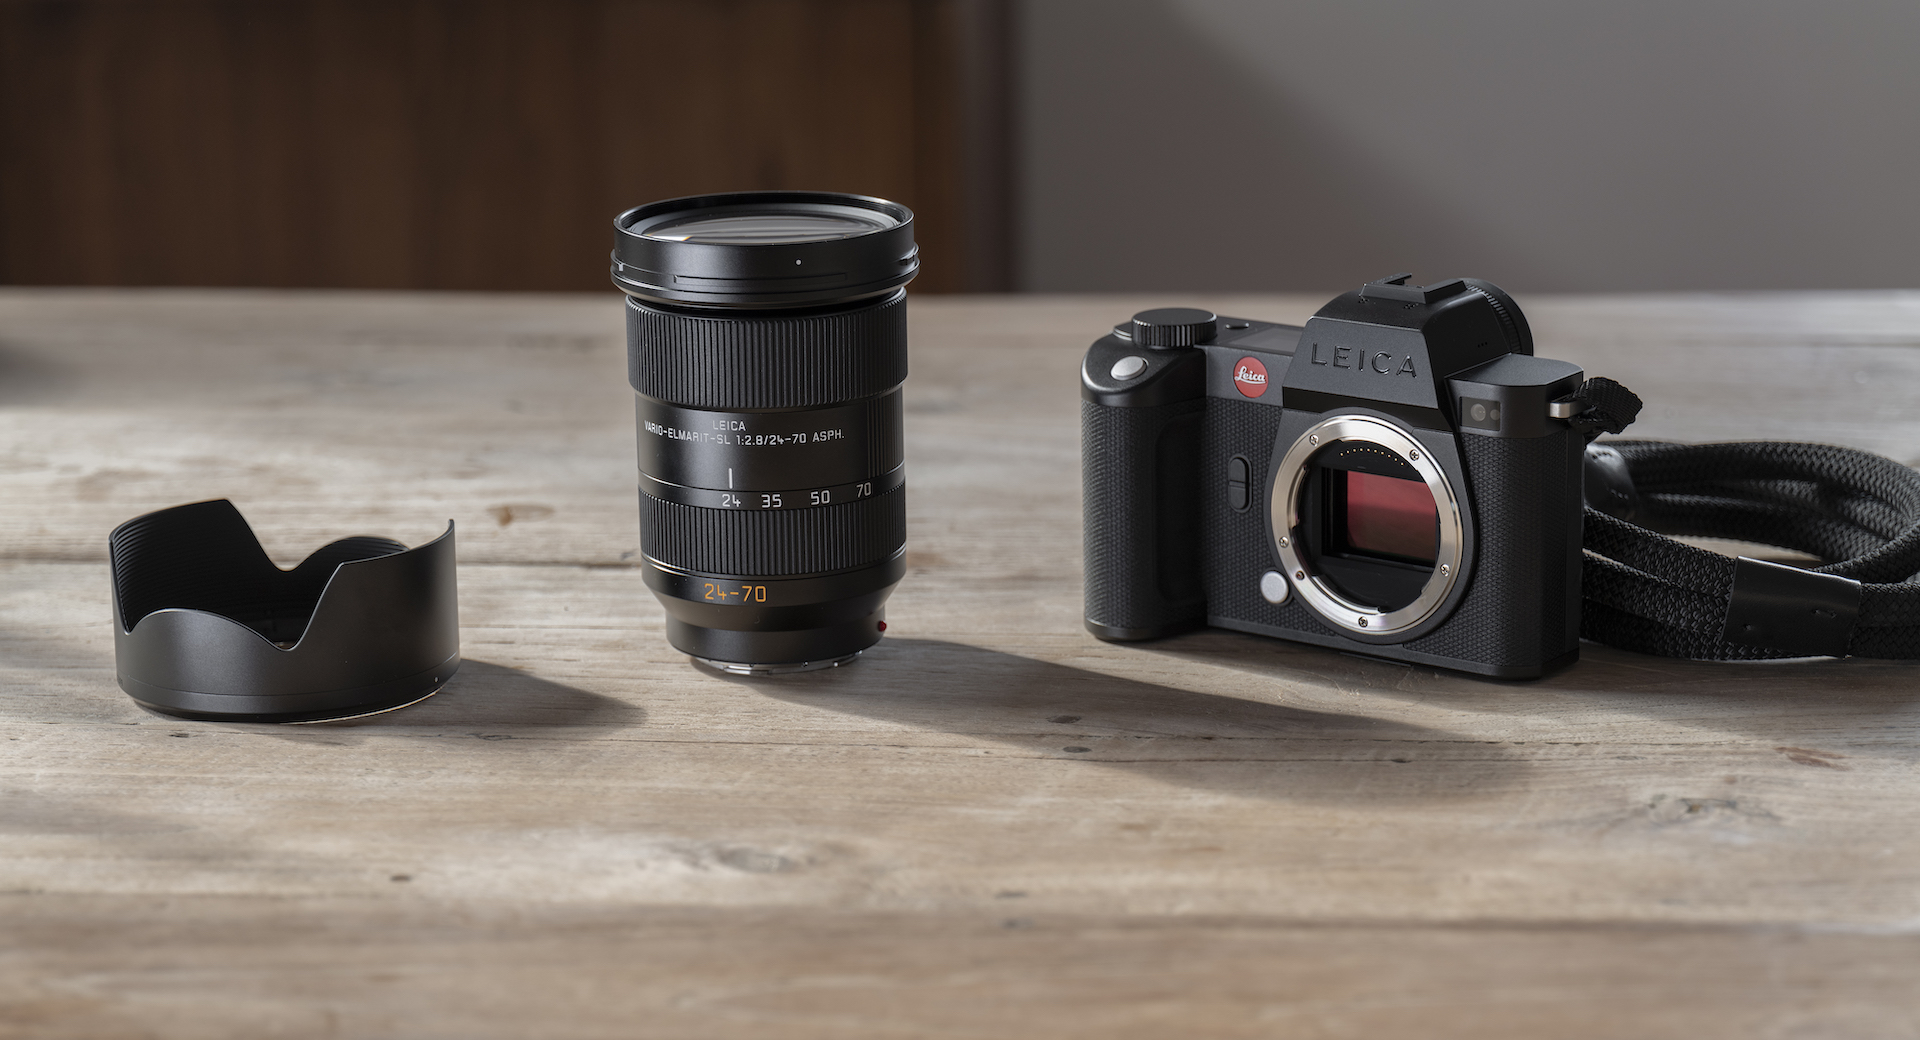 The new Vario-Elmarit-SL zoom lens addition to the Leica SL lens lineup is perfect for travelers planning new adventures.